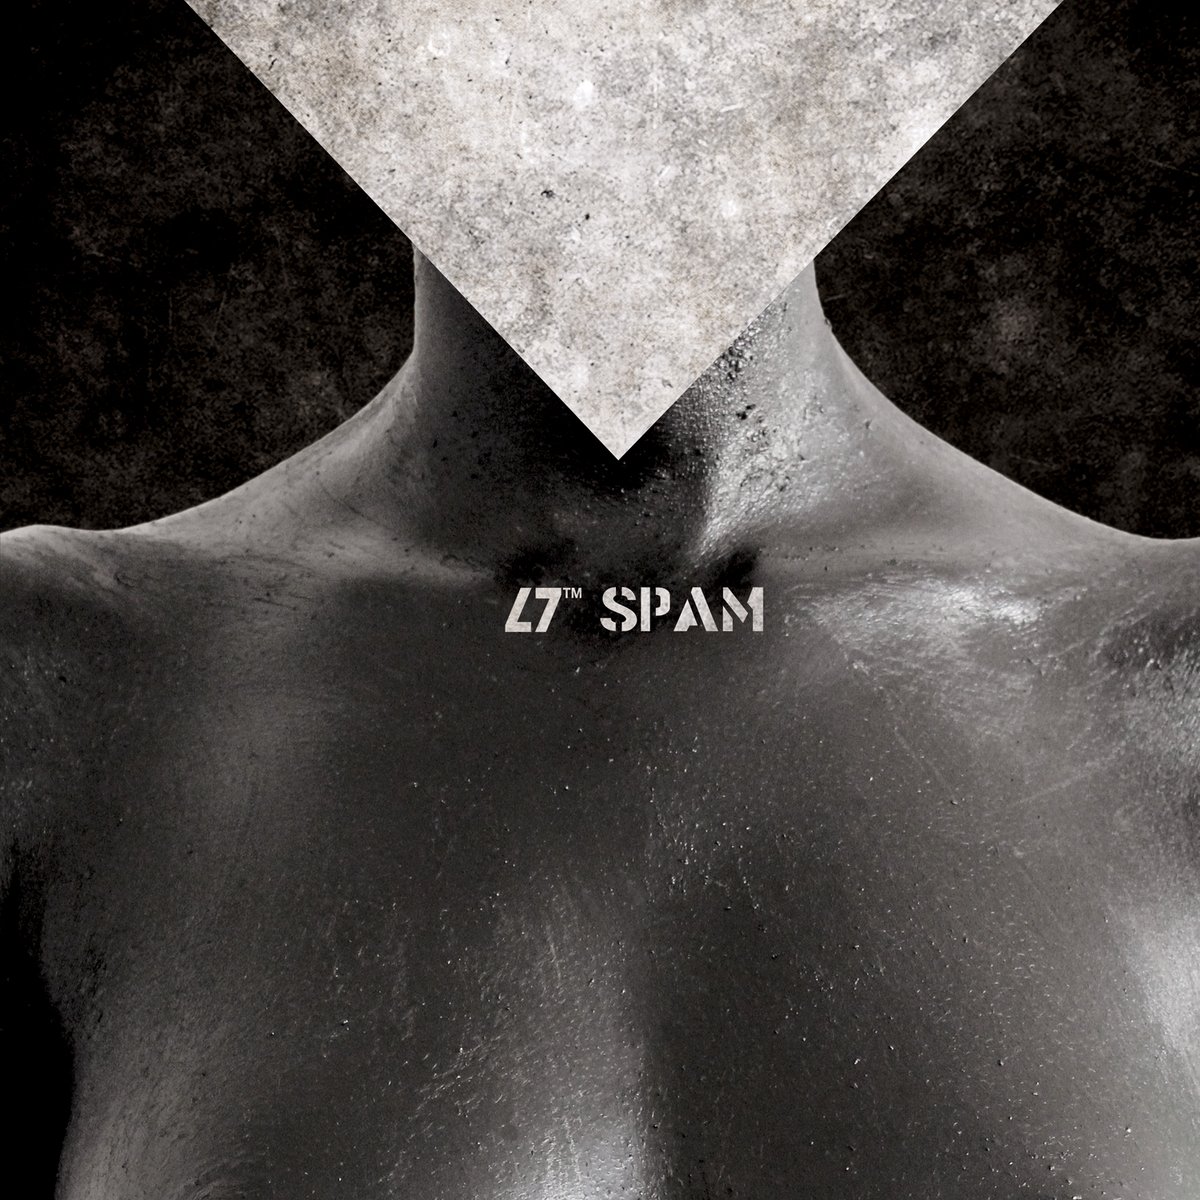 Image of 77™ - Spam 12"